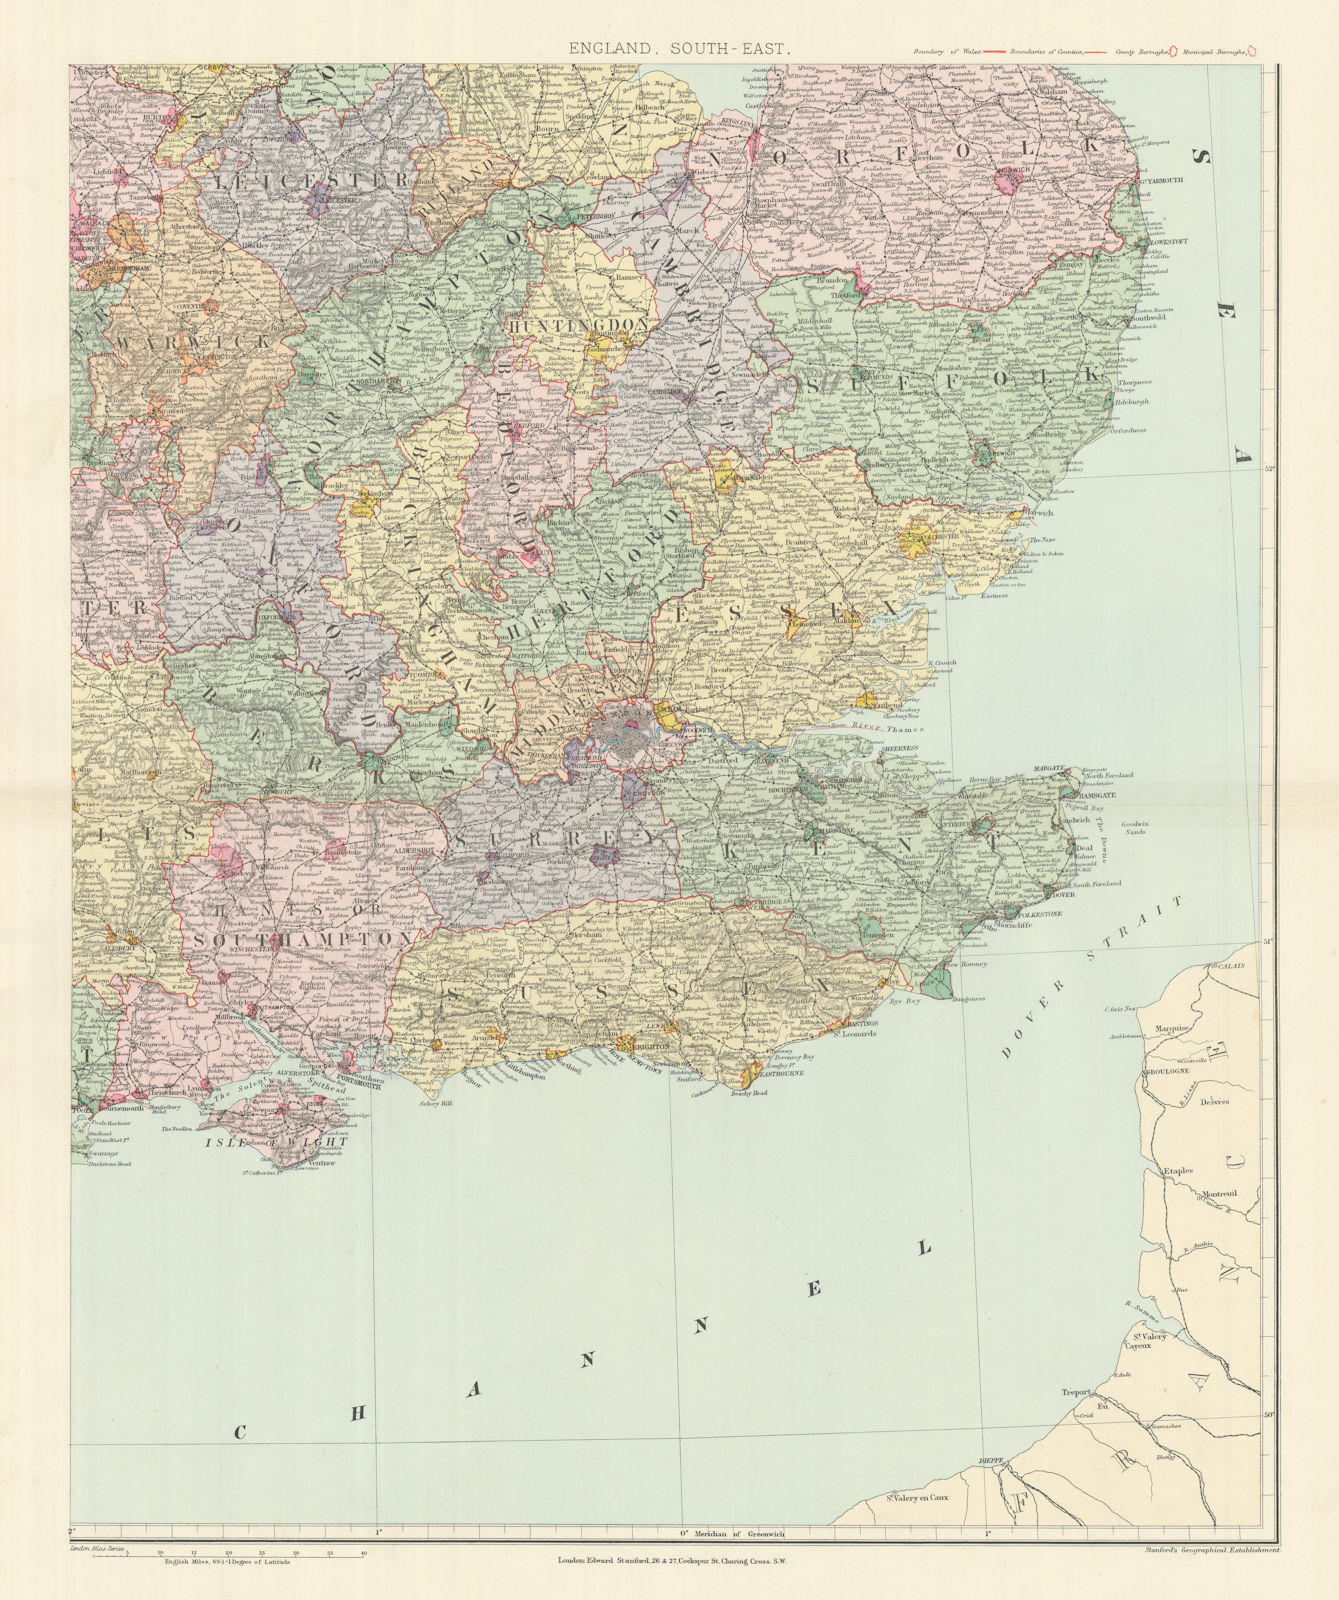 Associate Product South east England. Counties & boroughs. Large 62x50cm. STANFORD 1894 old map